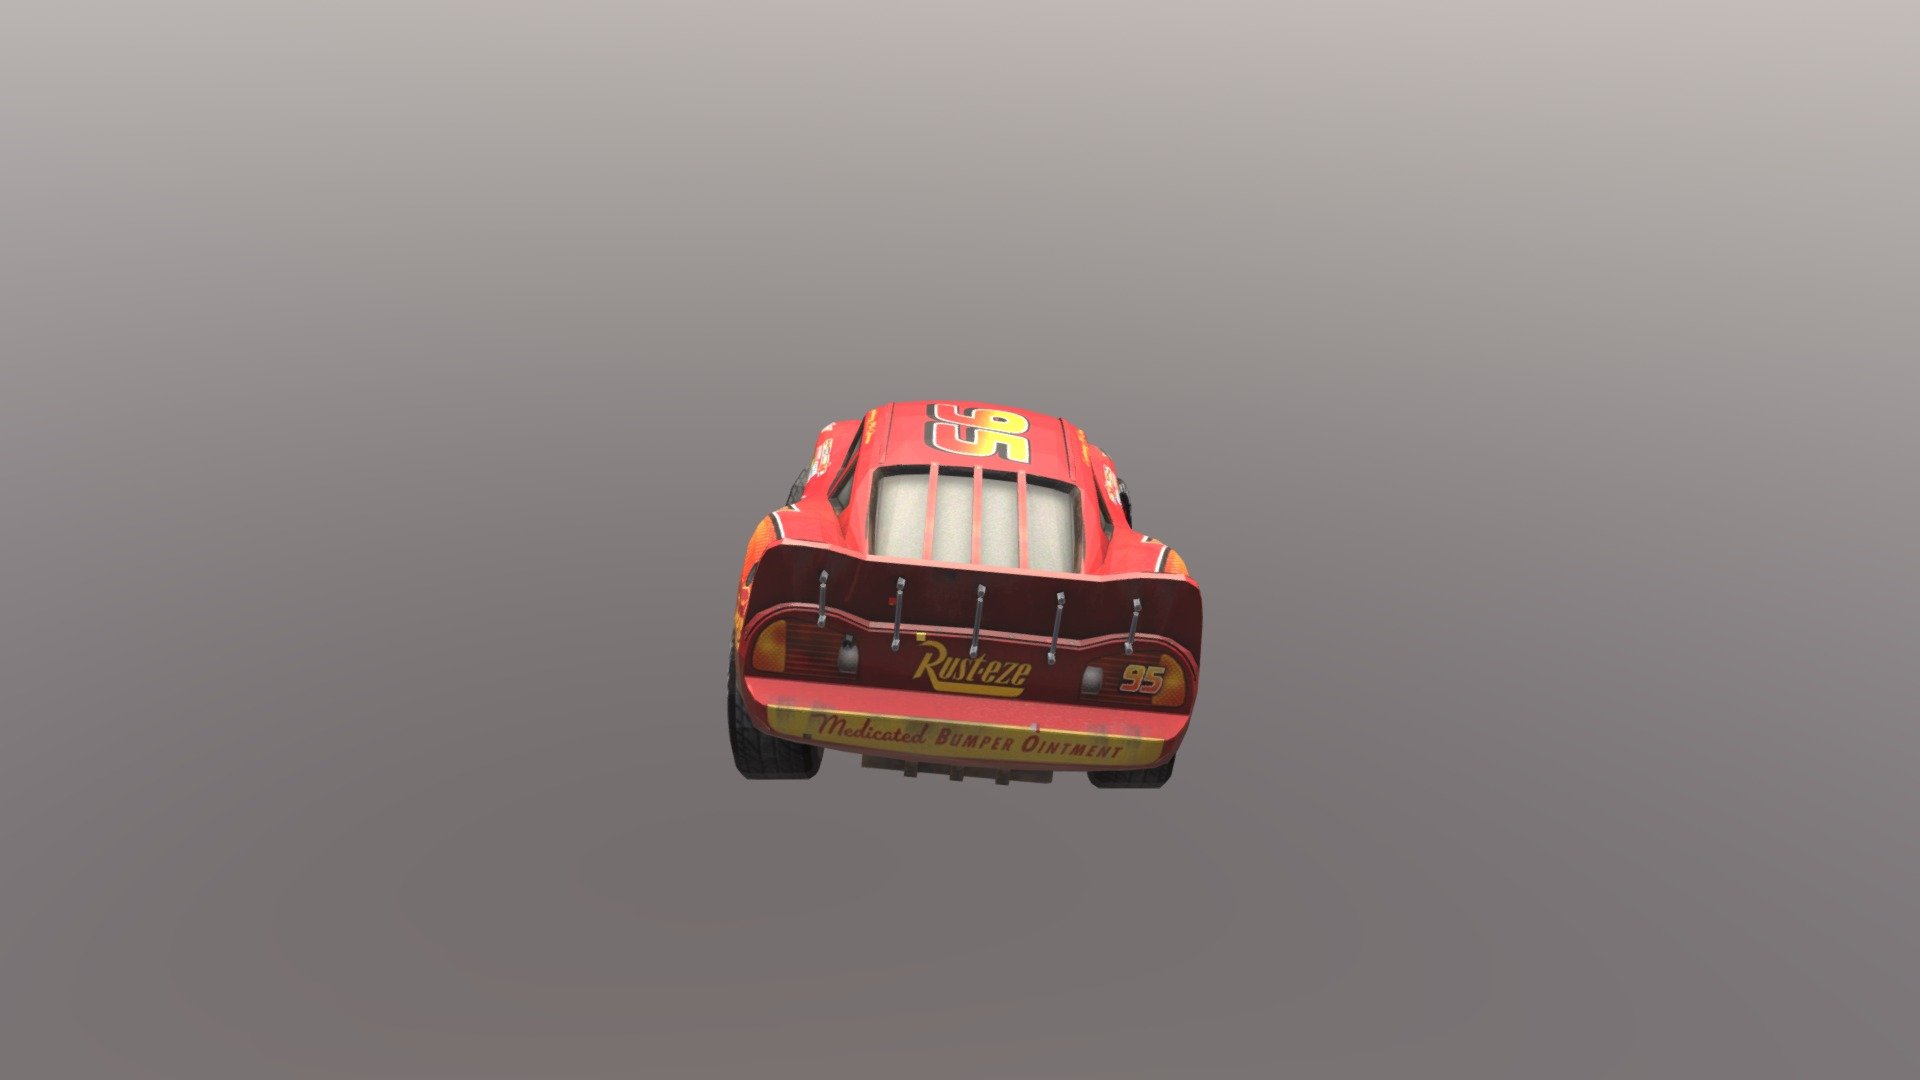 Lightning Is A Racer From The Piston Cup From Cars Movie
Cars Video Game:Race-O-Rama
Disney&amp;Pixar. Copyright - Lightning McQueen - 3D model by CarsFanLol 3d model